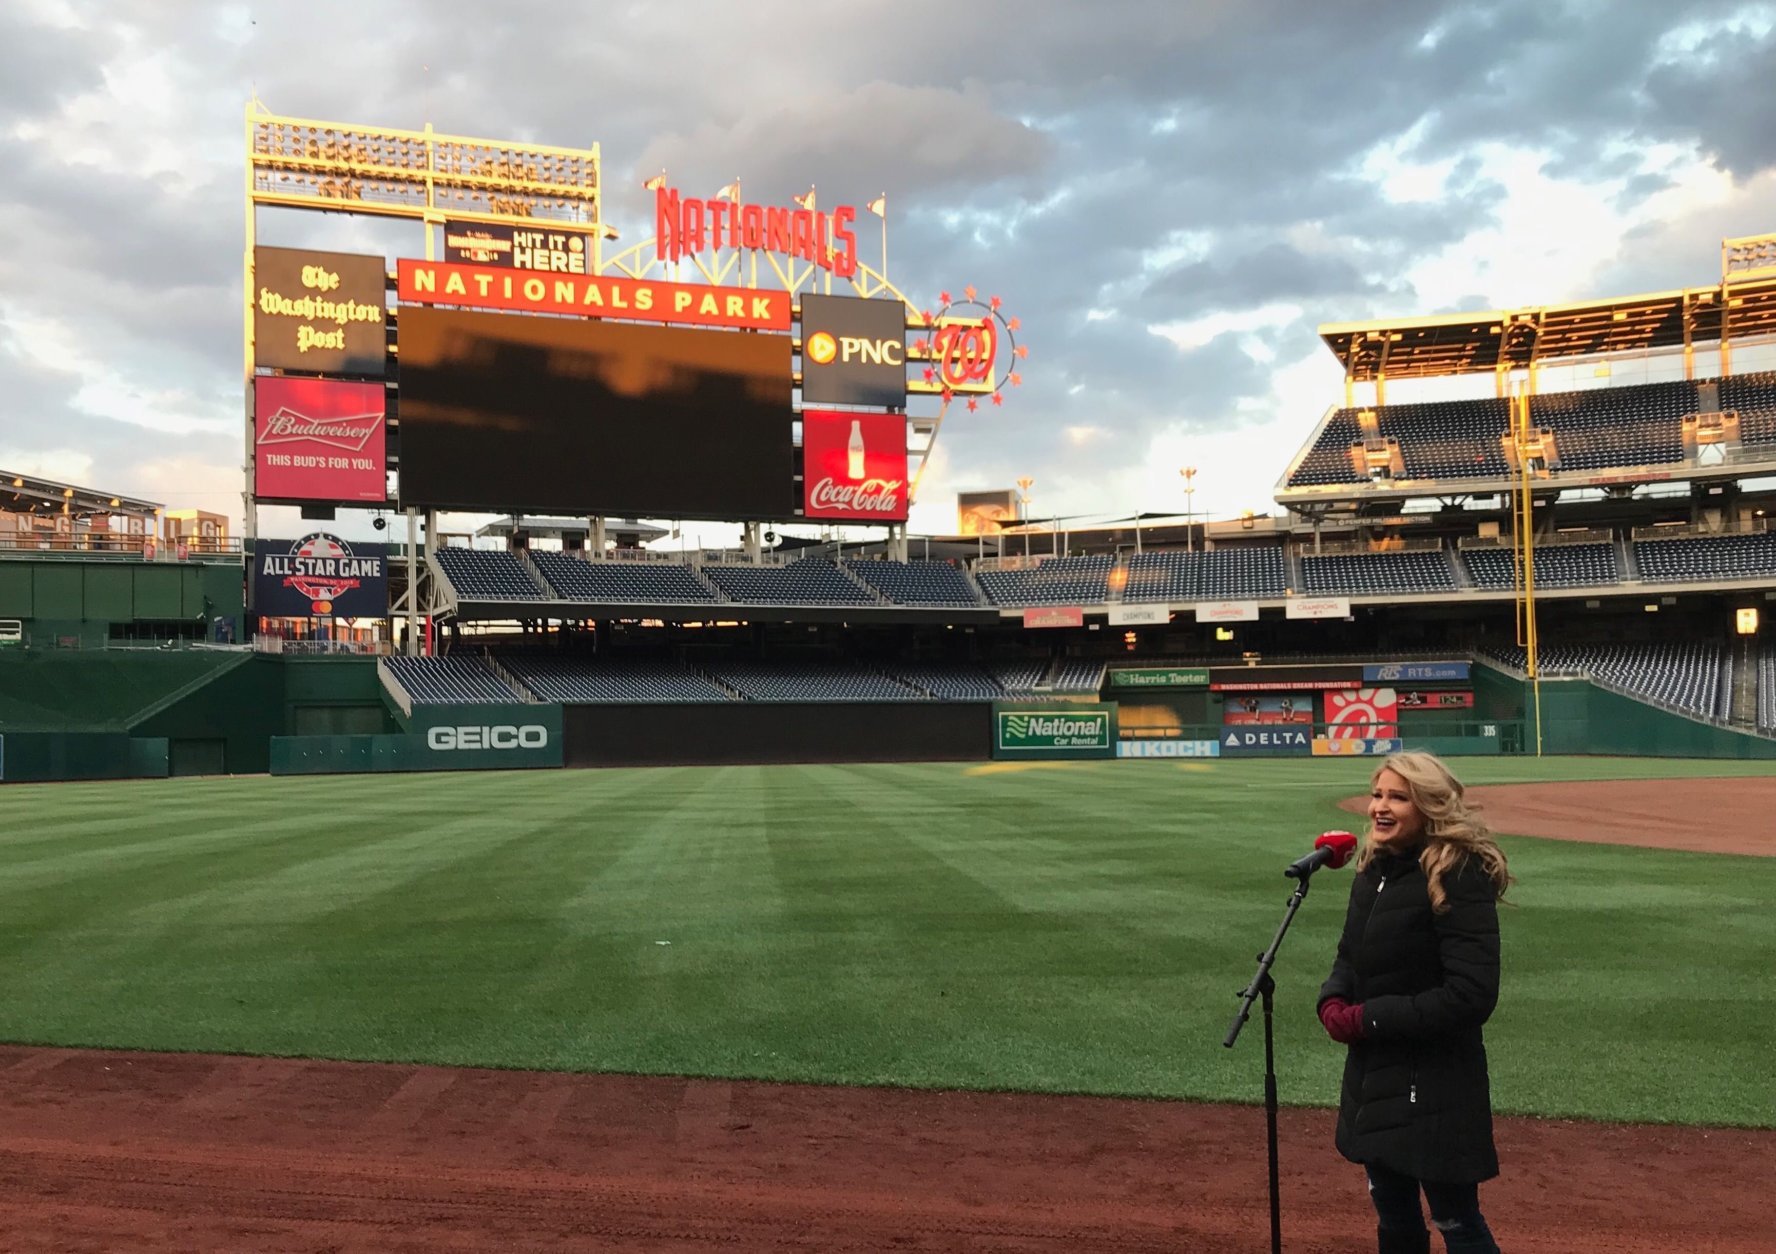 Another woman performs the national anthem during open auditions at Nationals Park. (WTOP/Michelle Basch)